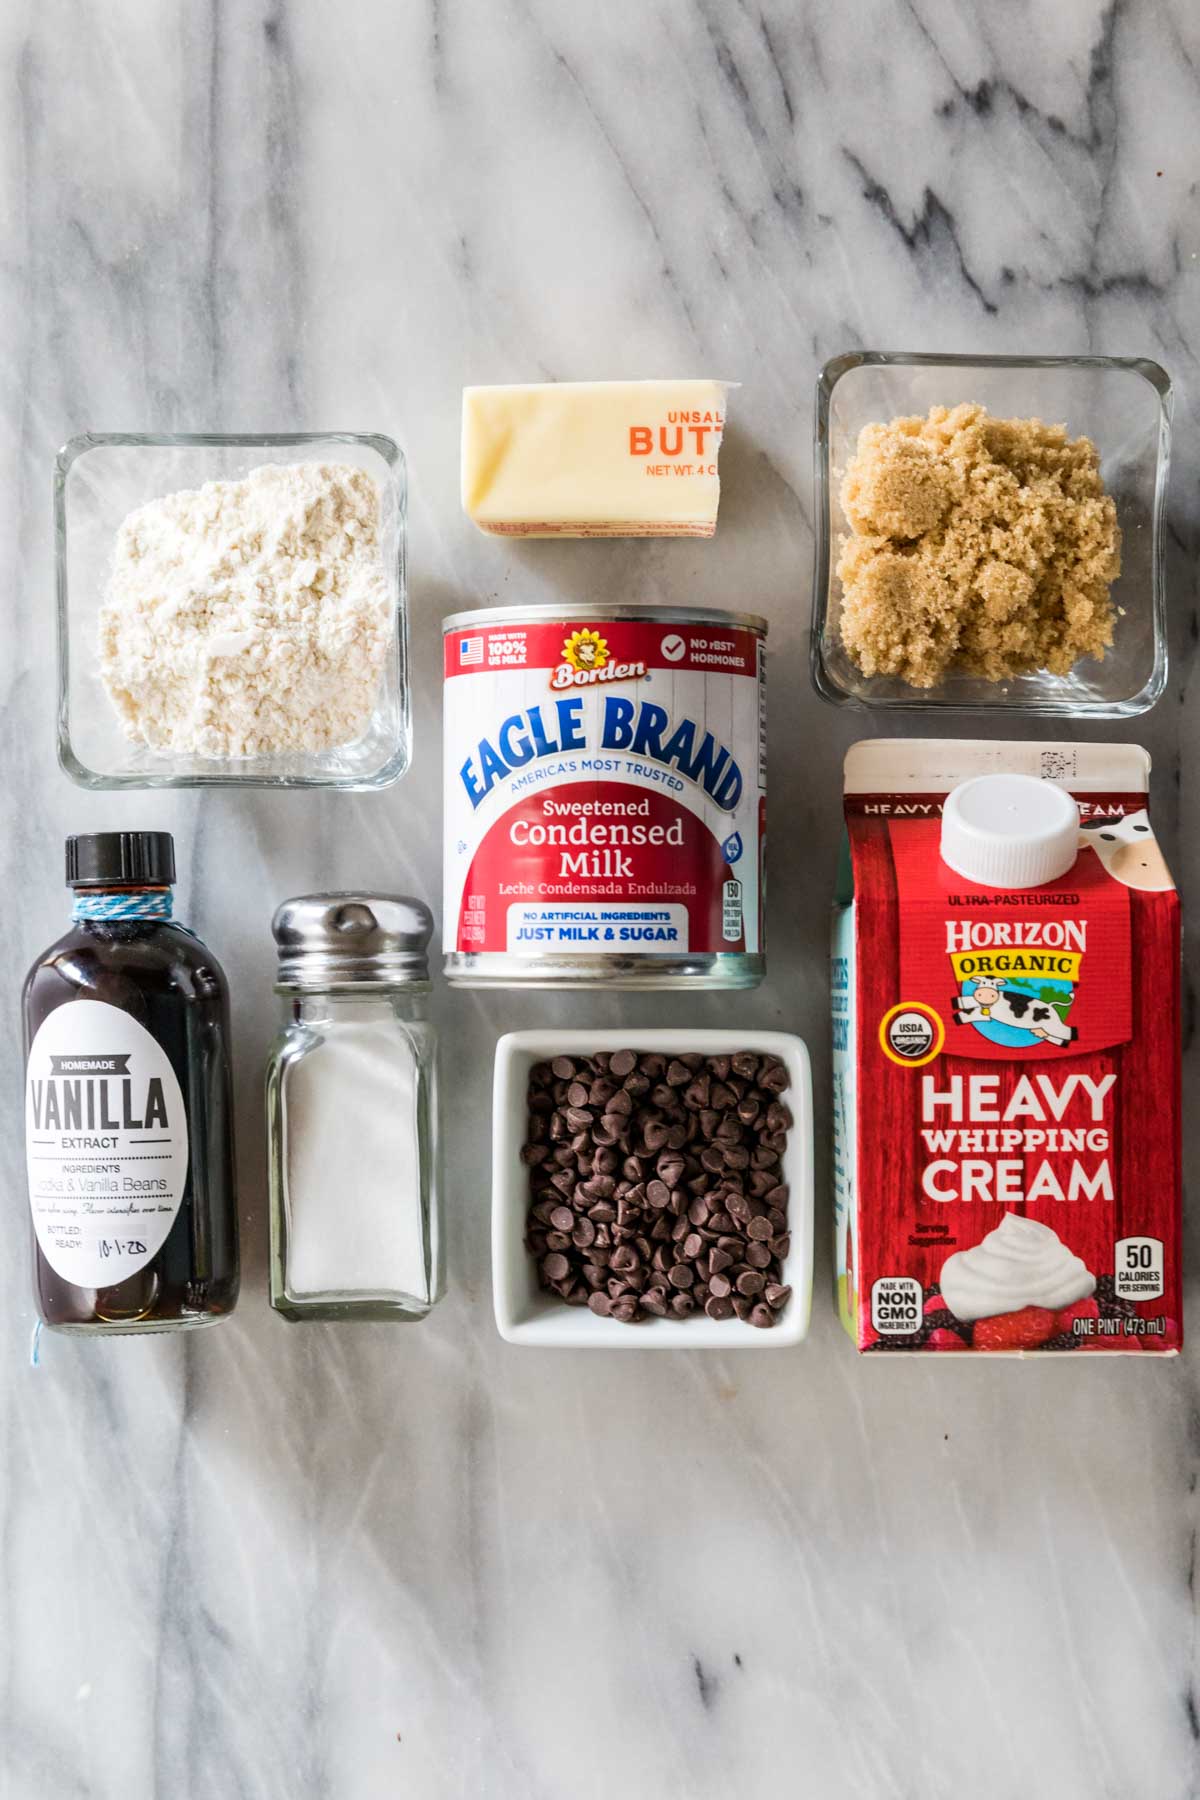 Overhead view of ingredients including condensed milk, heavy whipping cream, brown sugar, chocolate chips, and more.